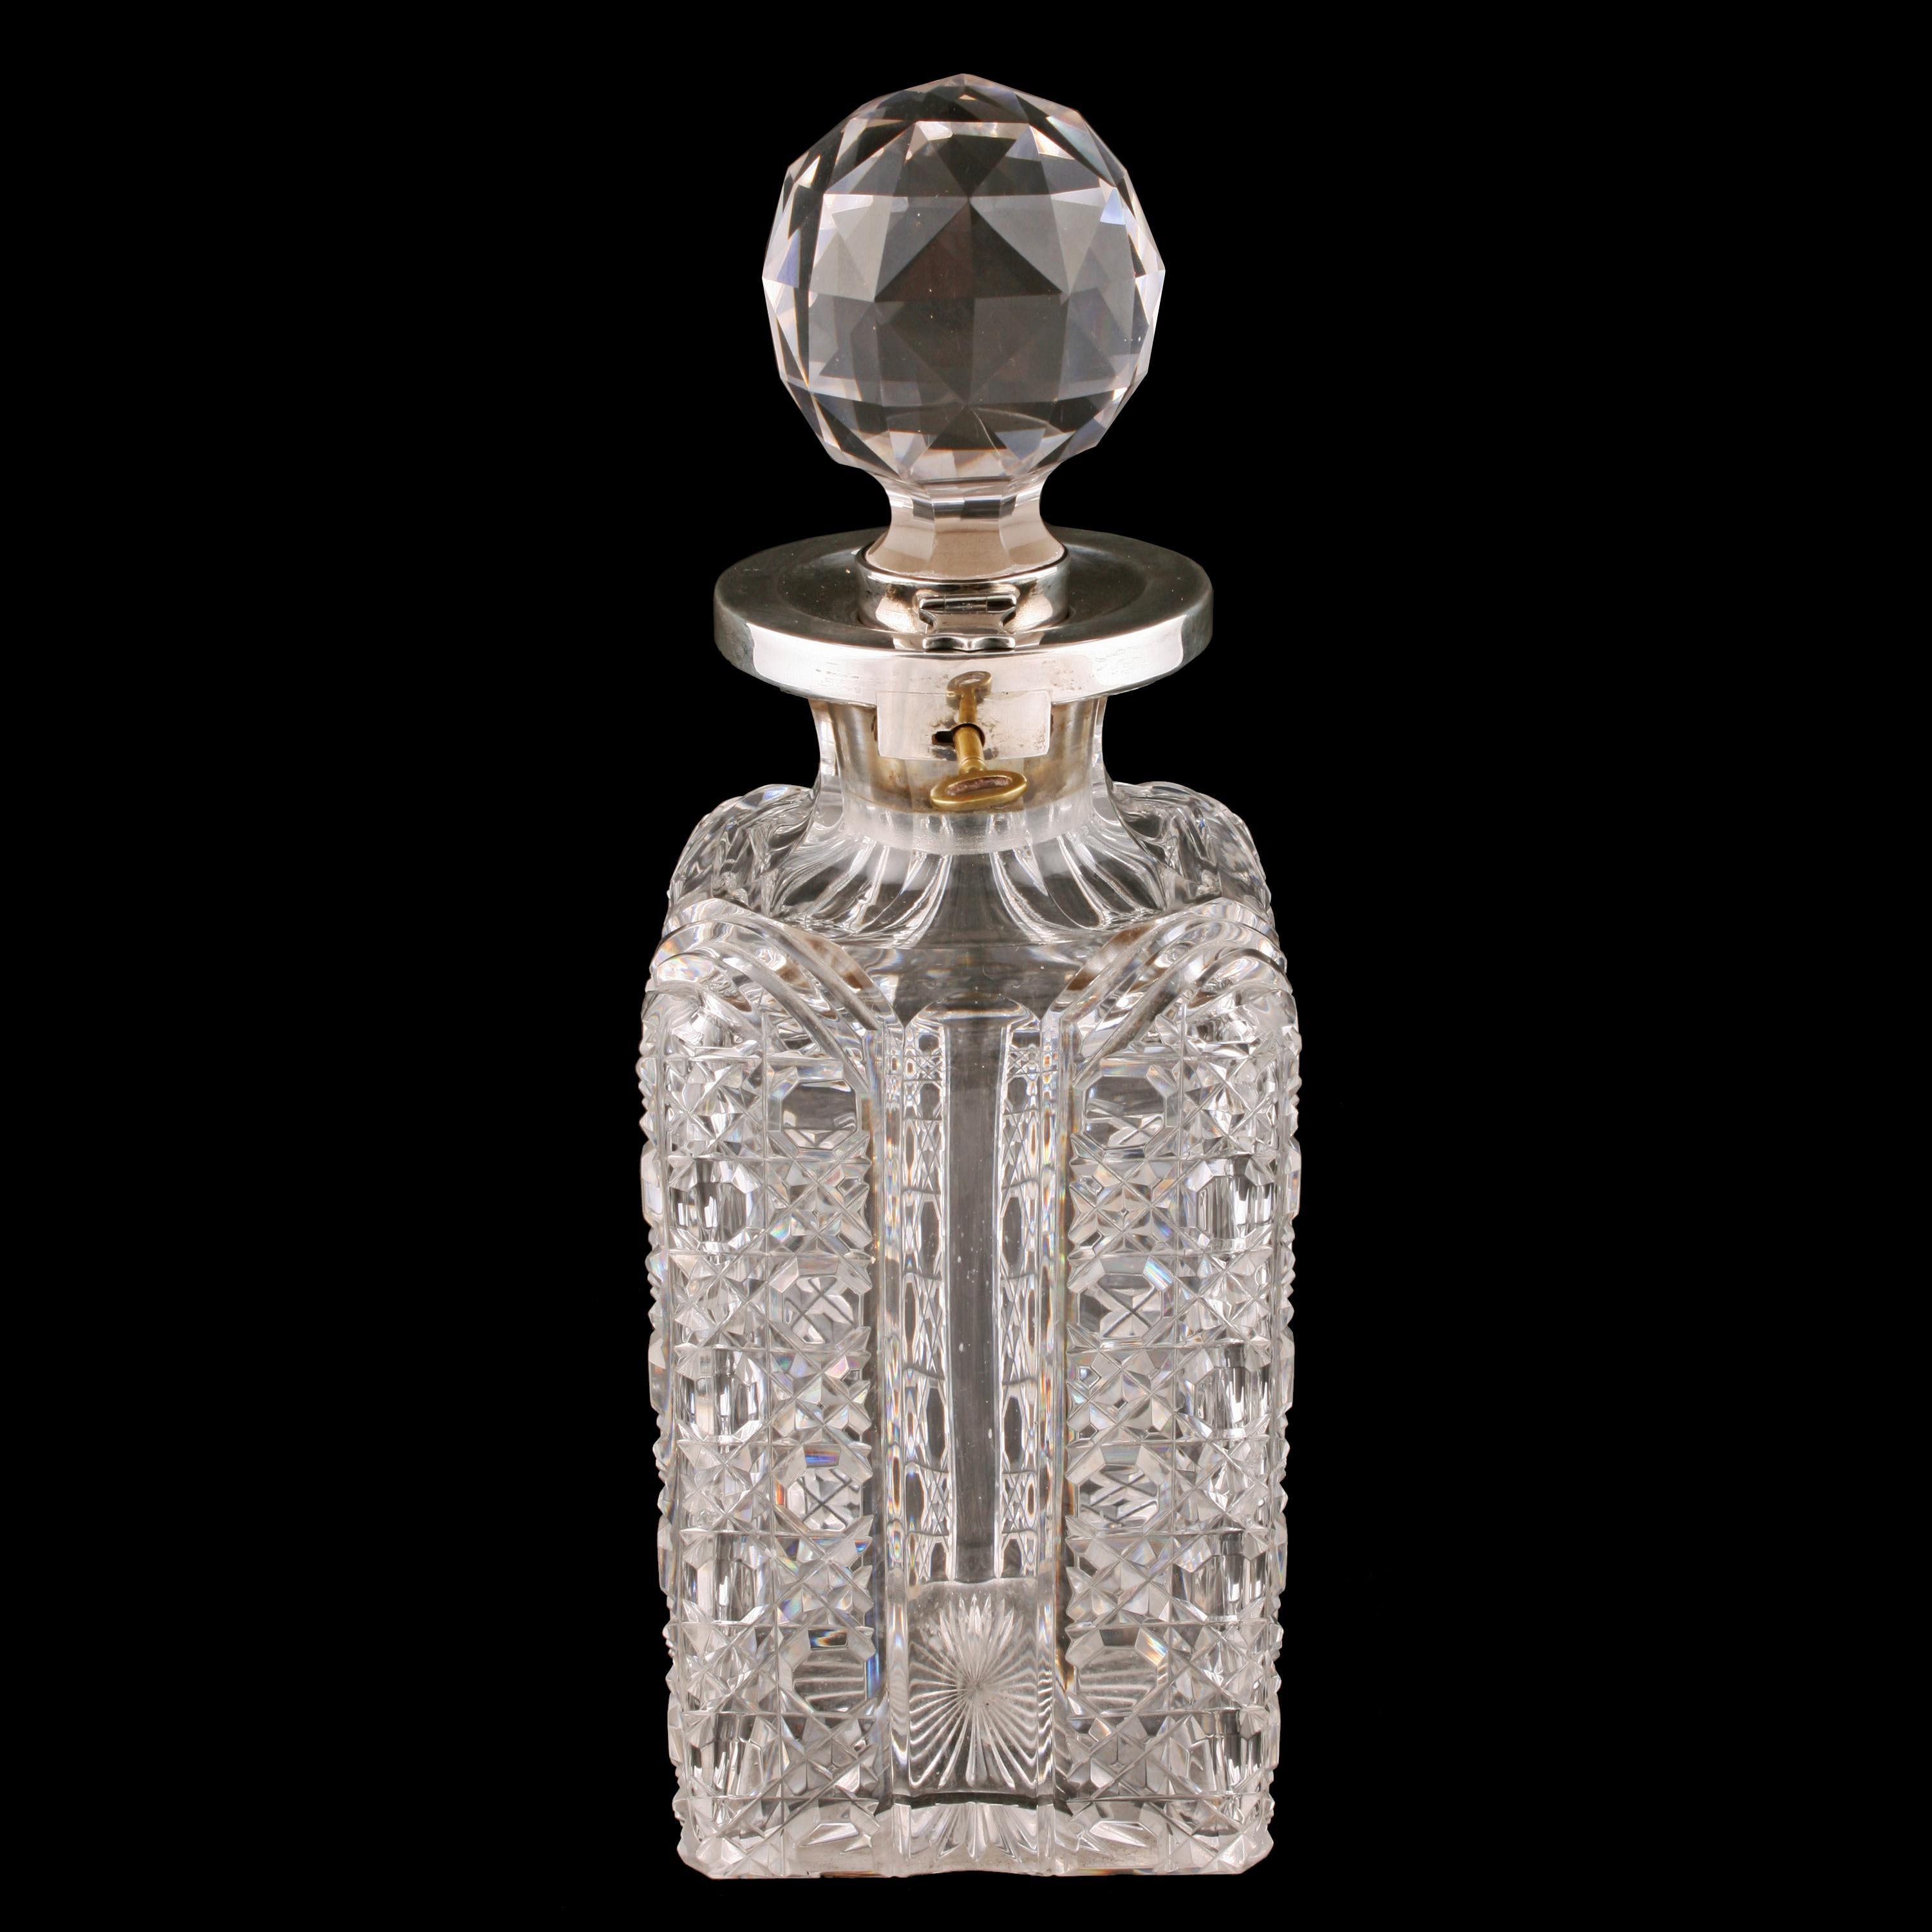 A Victorian Betjemann patent cut glass locking spirit decanter.

The square decanter has a cut body and a sterling silver collar on the neck with a lock and key.

The circular cut glass stopper is silver mounted with a hinged clasp that fits the